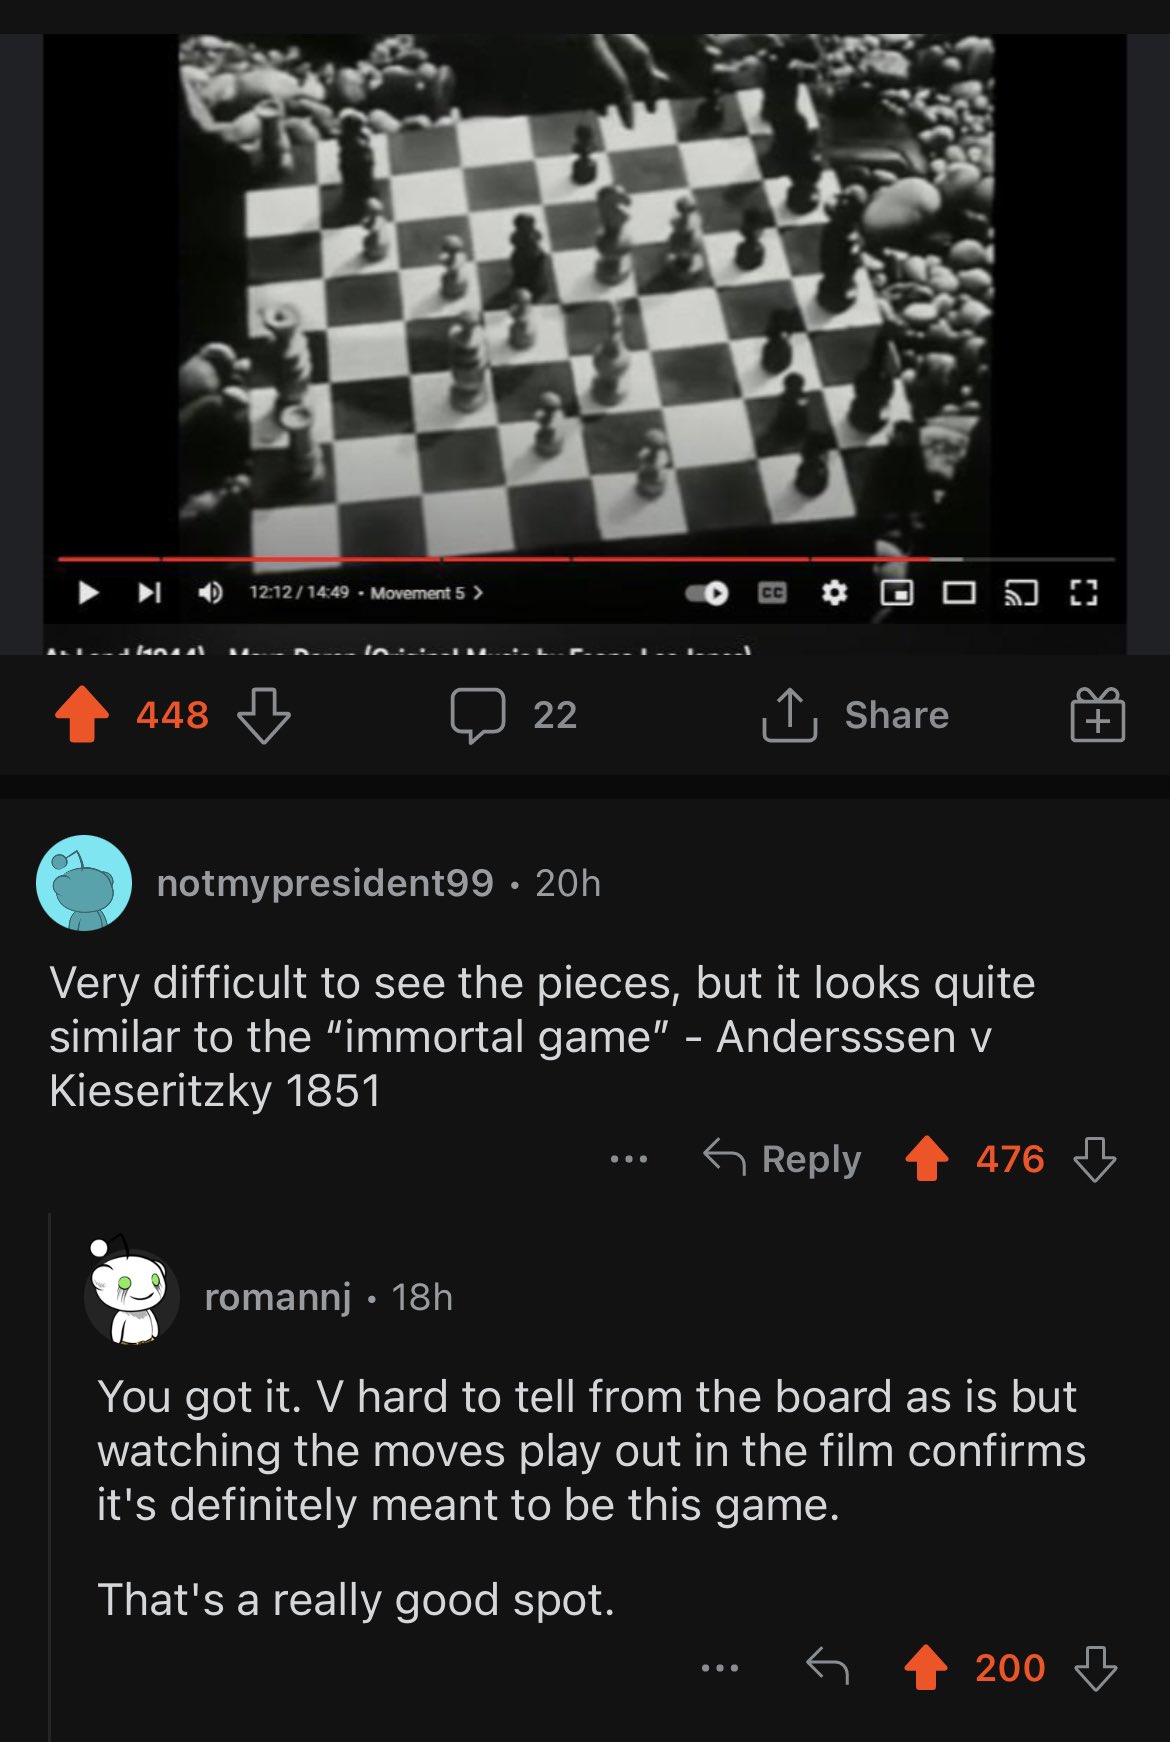 Joseph Elliott on X: The chess reddit is currently talking about Maya  Deren's film At Land, which is something I never would have expected, and  yet is going exactly how I'd have